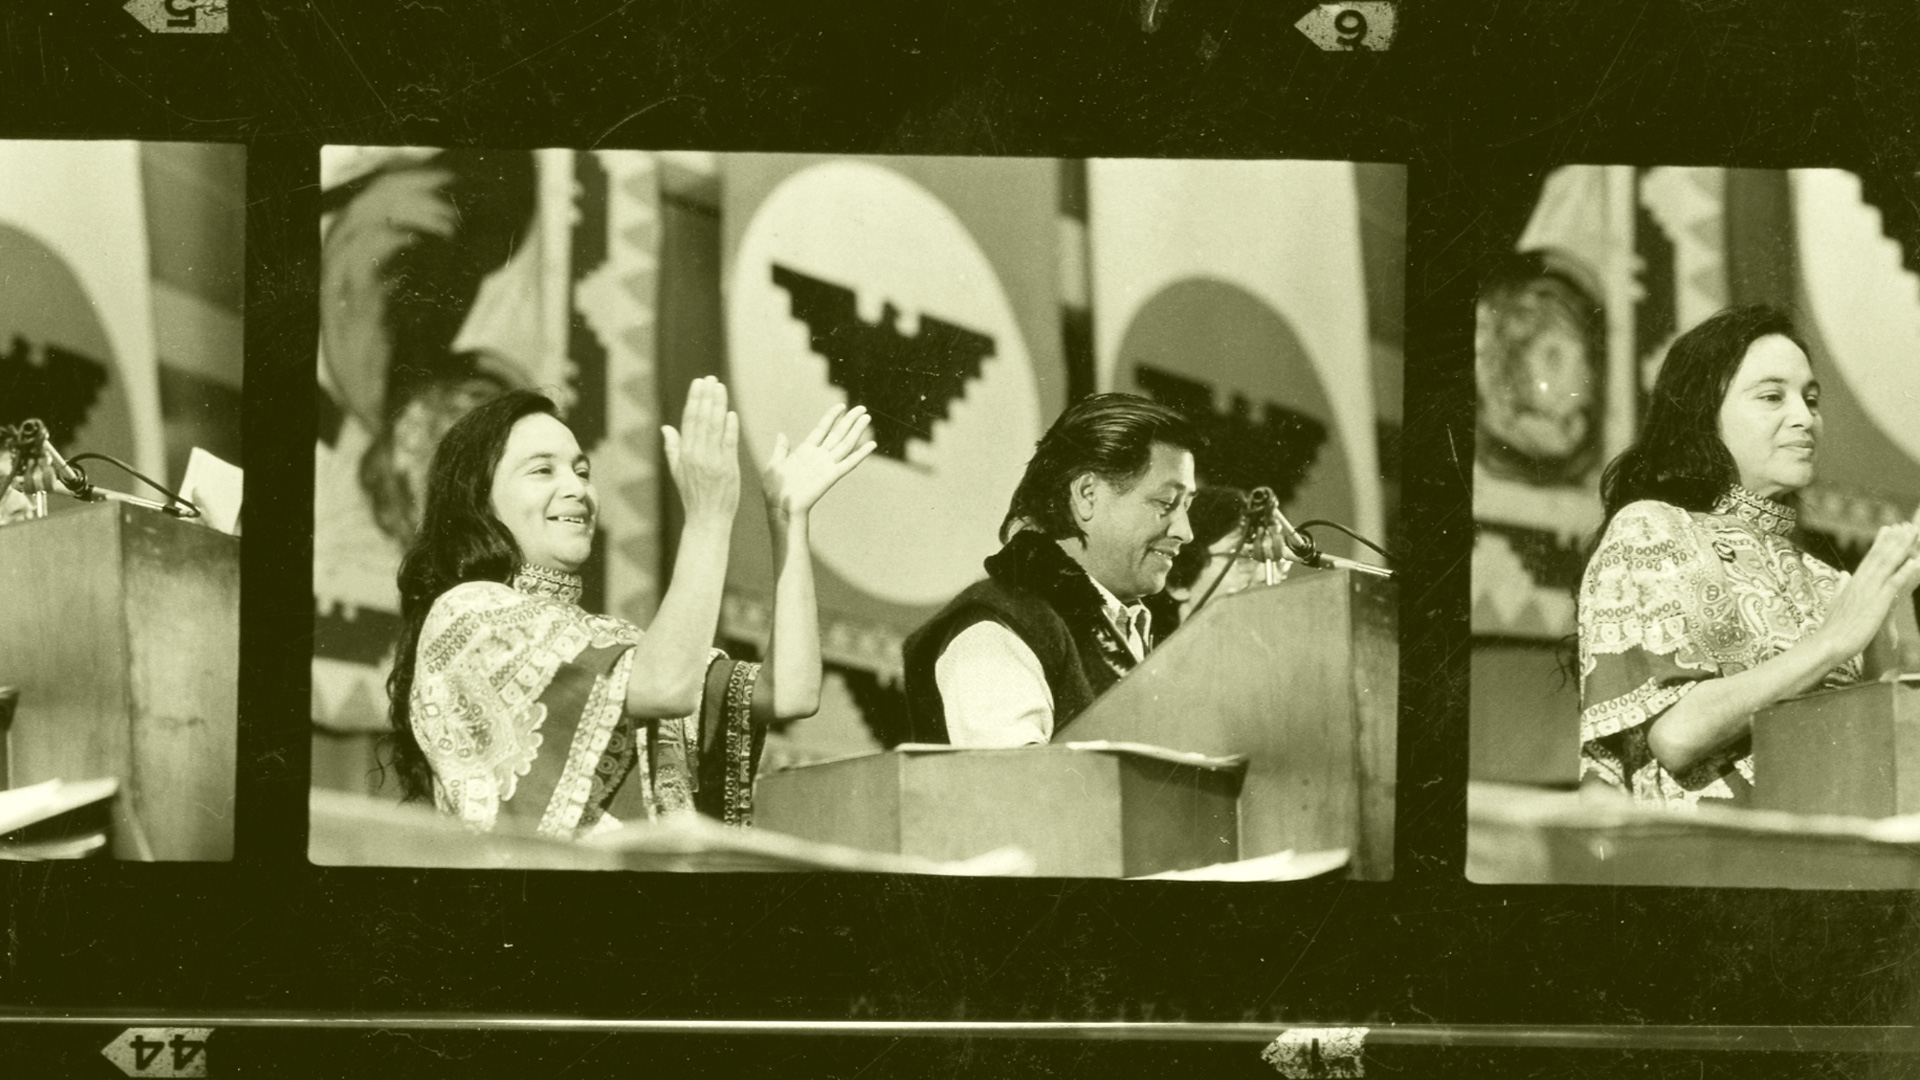 Dolores Huerta, with Cesar Chavez, in public speech from the 60s, in a film strip image